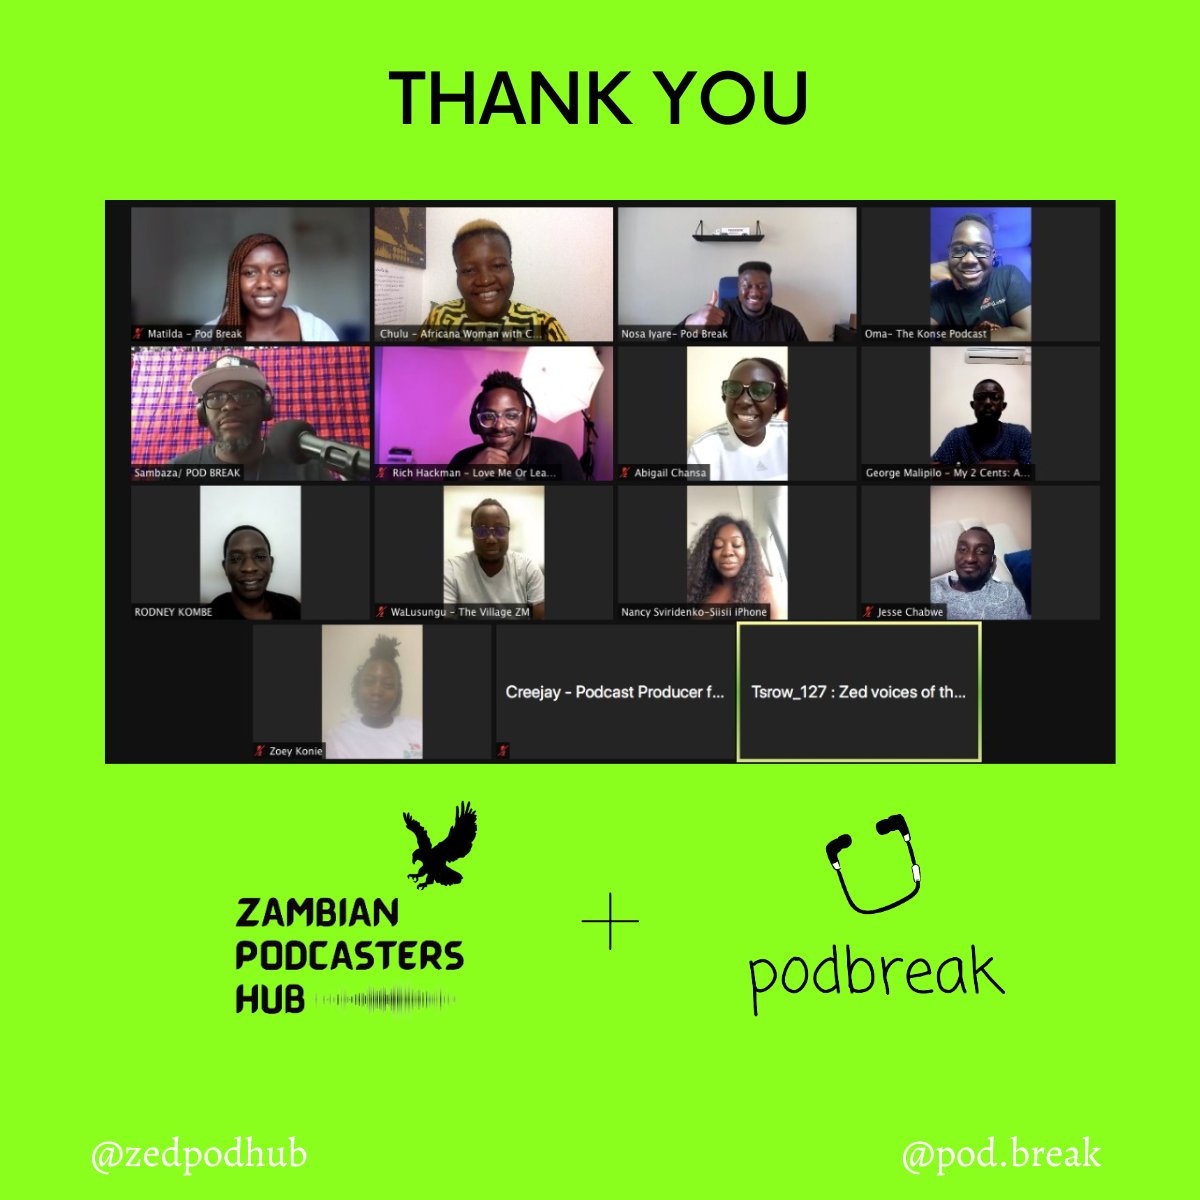 We had an amazing meet & greet with @ZedPodHub last weekend. There is so much that we can do together.

Look forward to our next event where we'll be discussing 'Black Tax'. Here on Twitter Spaces. Sunday, 2nd Oct  @ 12pm EST (18hrs CAT)

#ZedpodHub #Podbreak #AfricanPodcasters